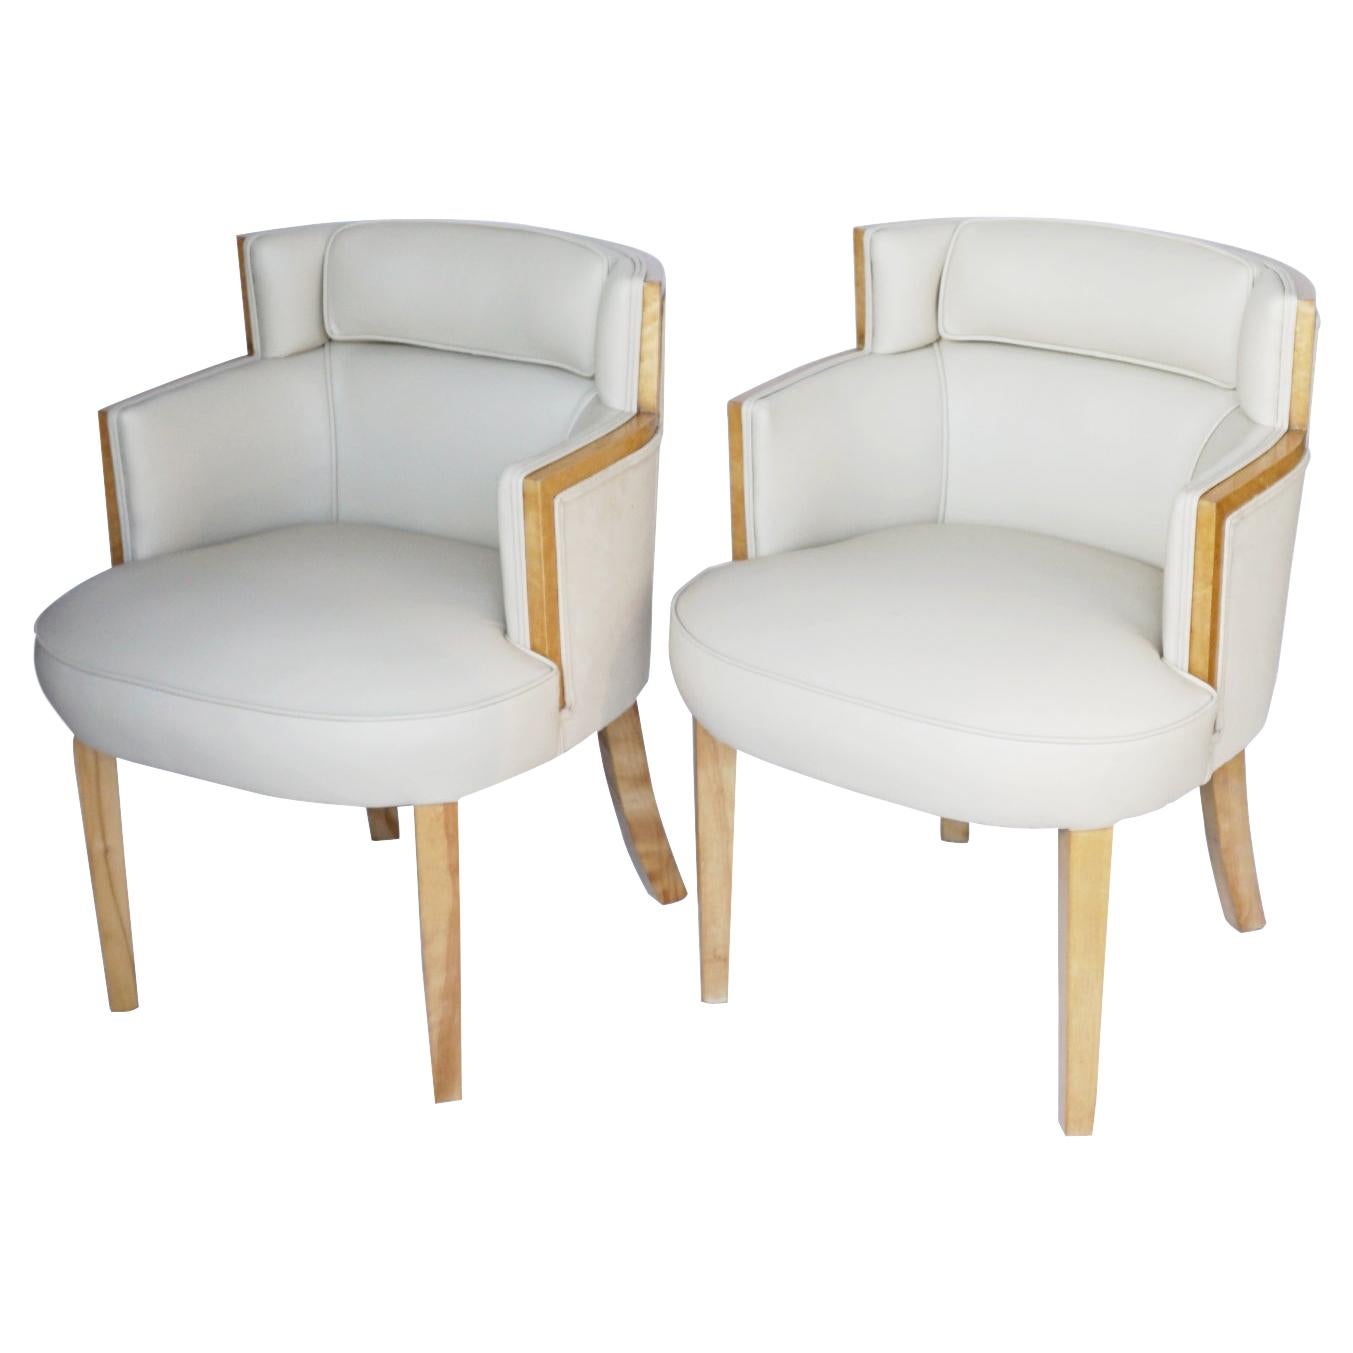 Pair of Art Deco Bankers Chairs English, Circa 1935